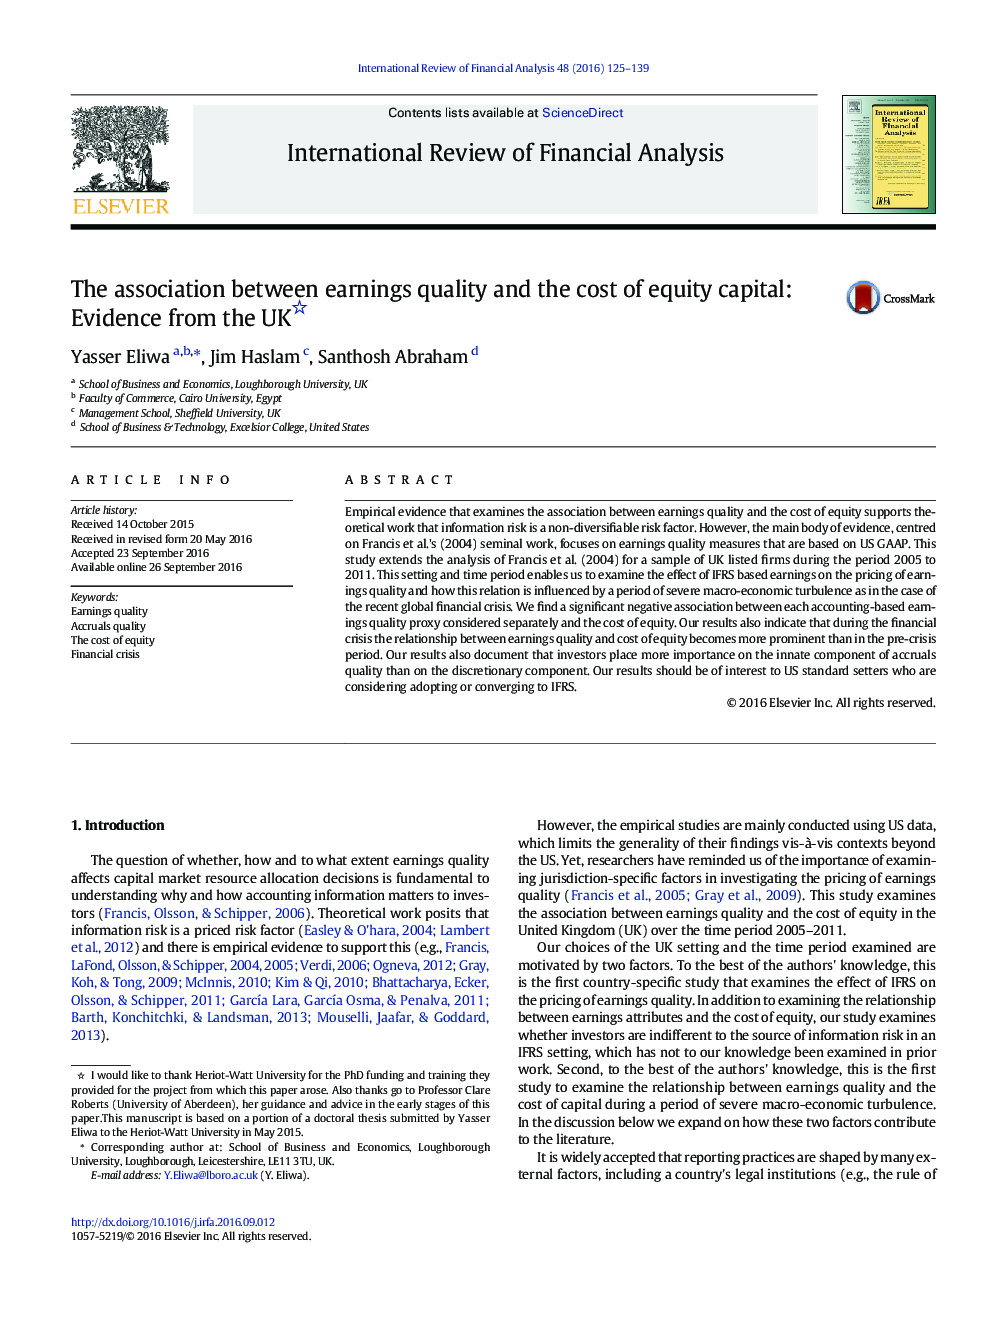 The association between earnings quality and the cost of equity capital: Evidence from the UK